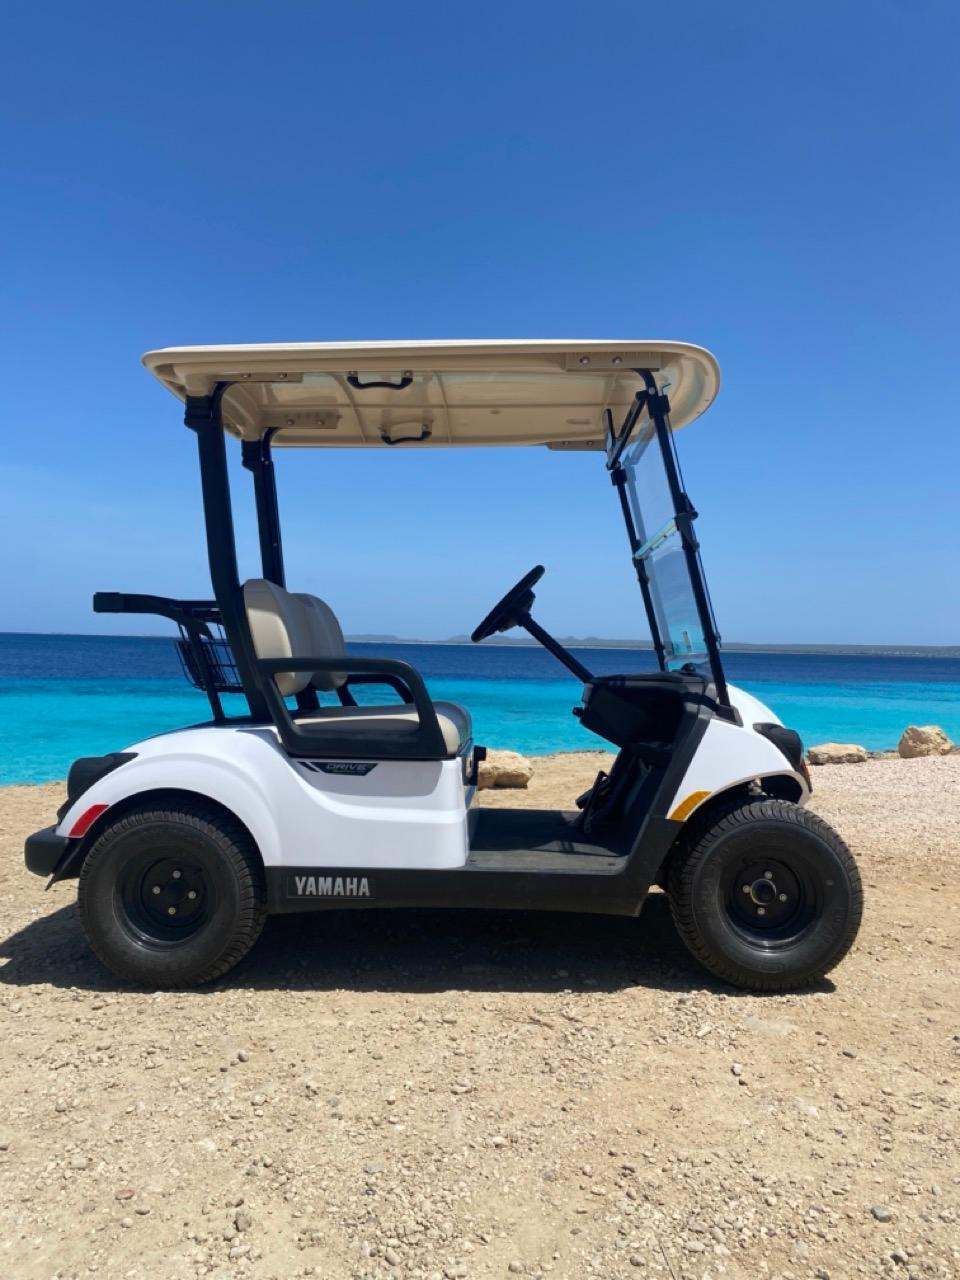 Brightly colored Yamaha 2-seater golf cart ready for an adventure on the sunny streets of Bonaire.